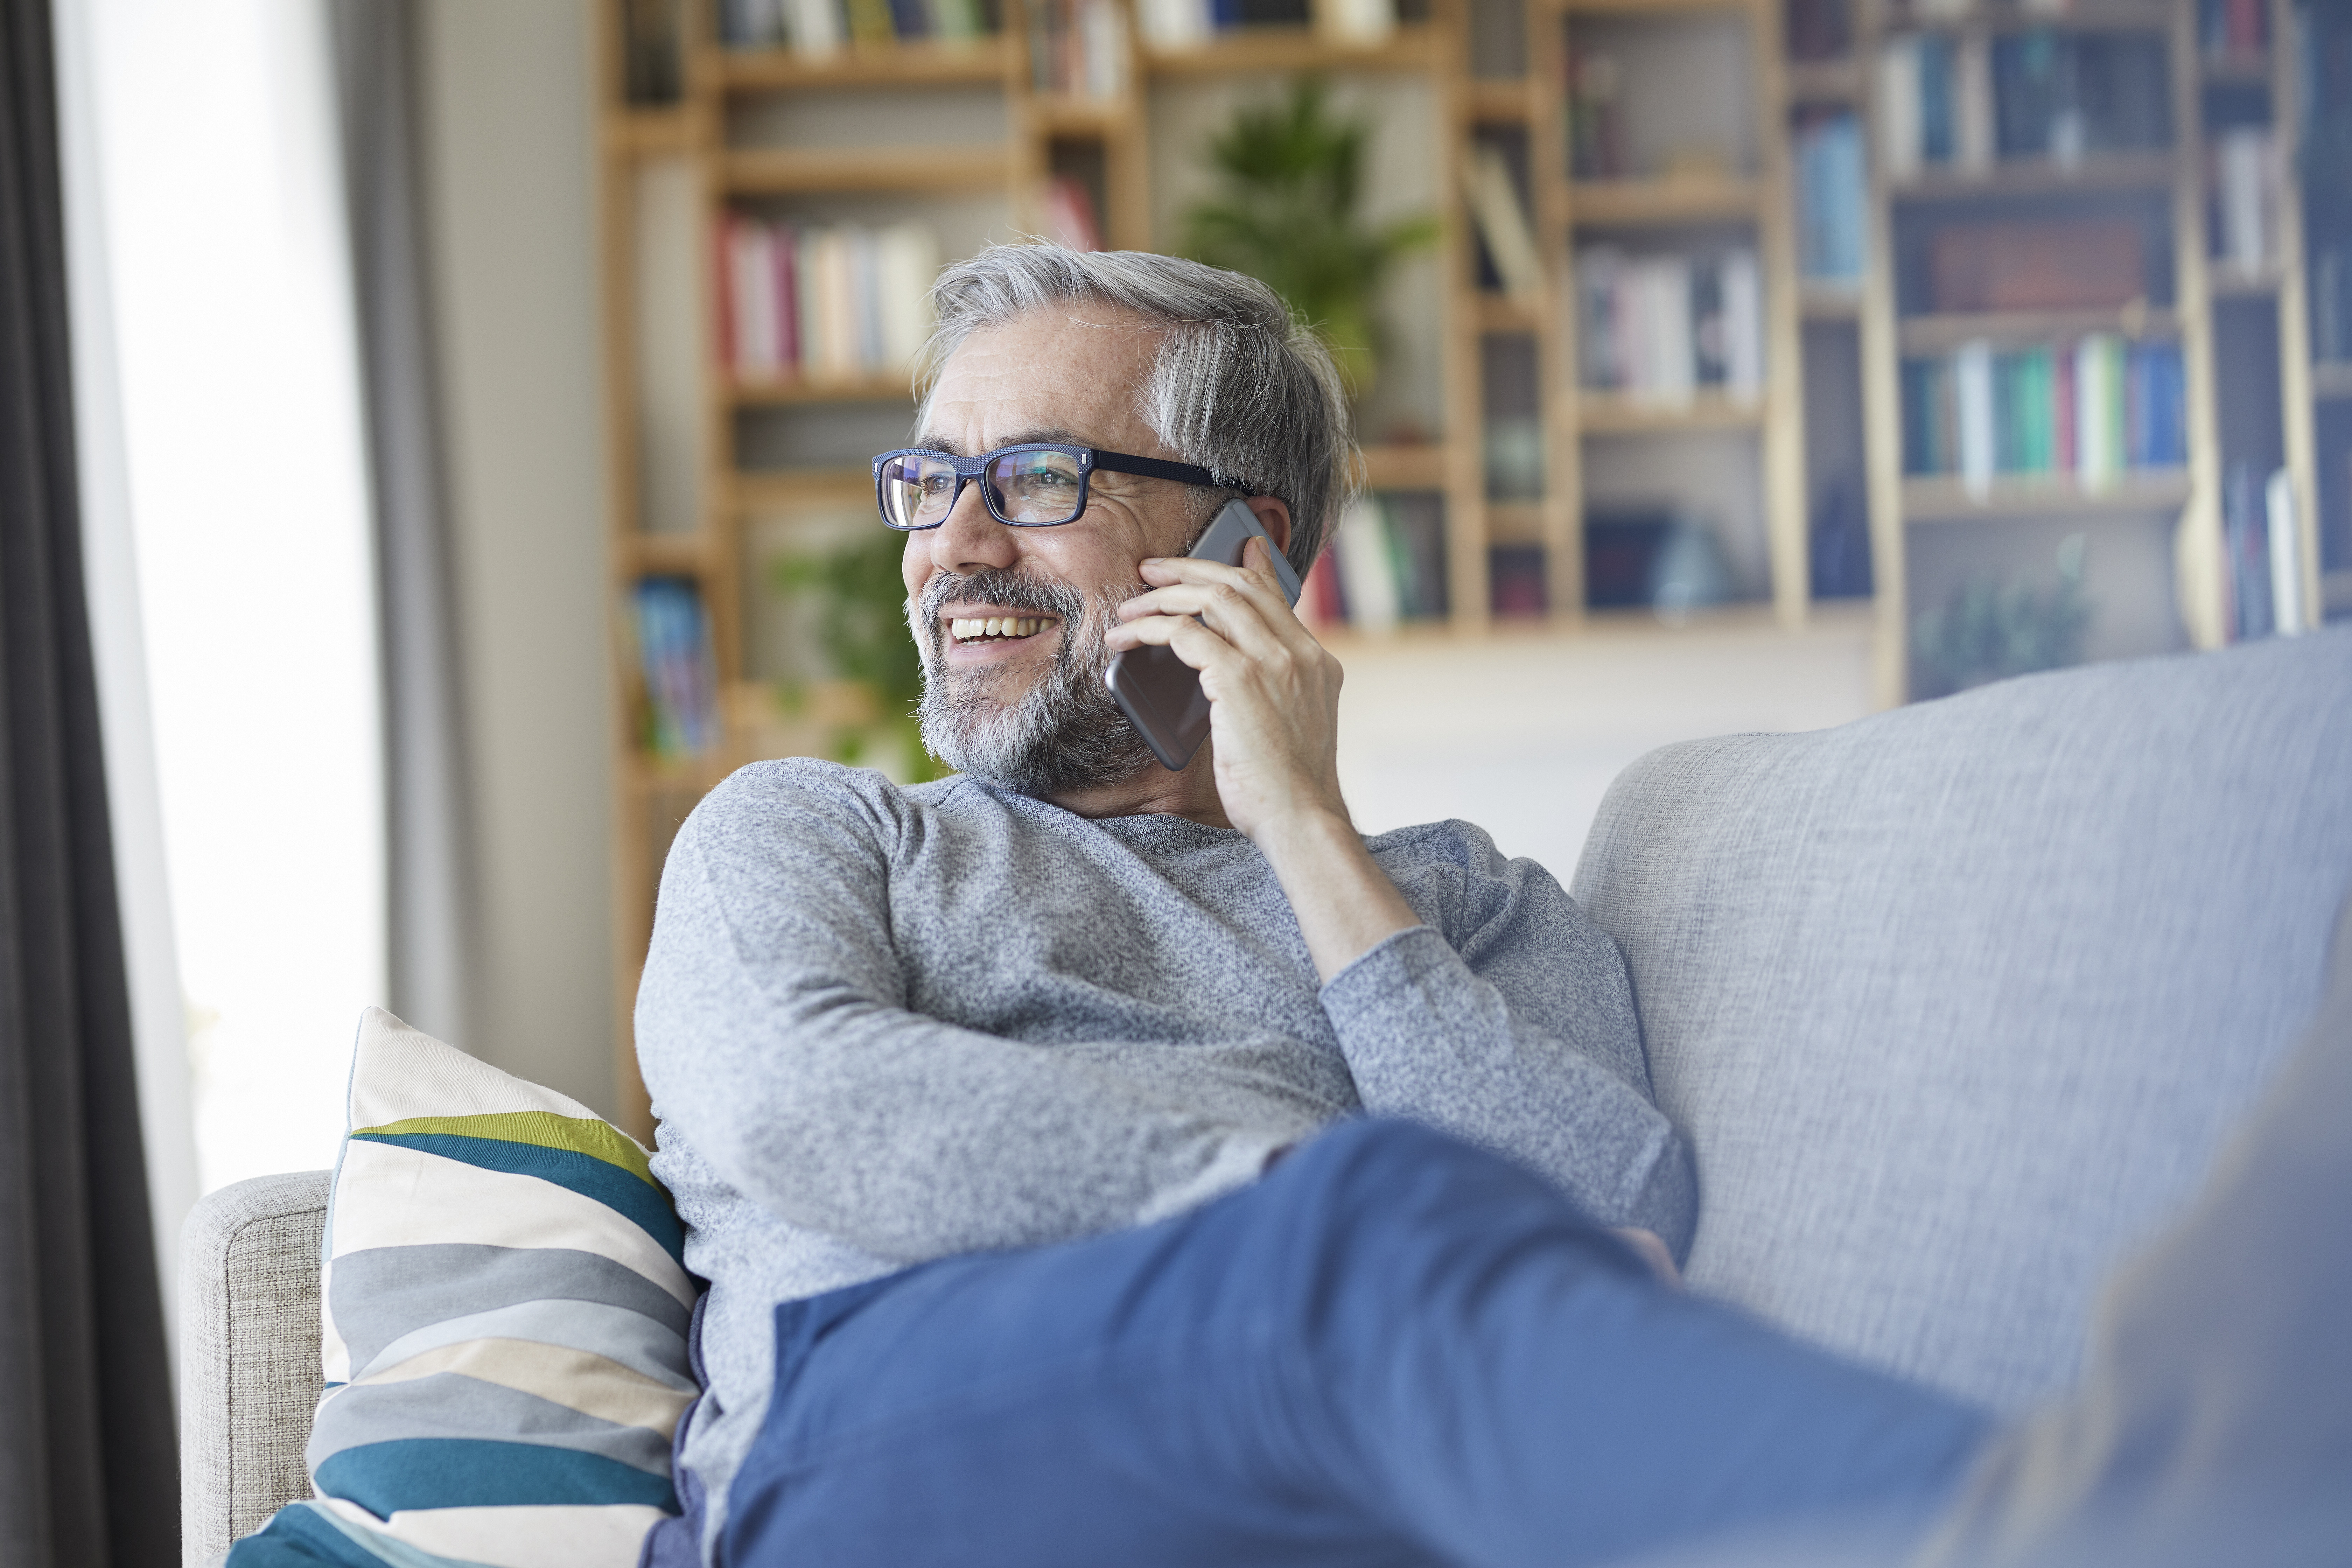 Mature man on the phone sitting on couch at home looking out of window